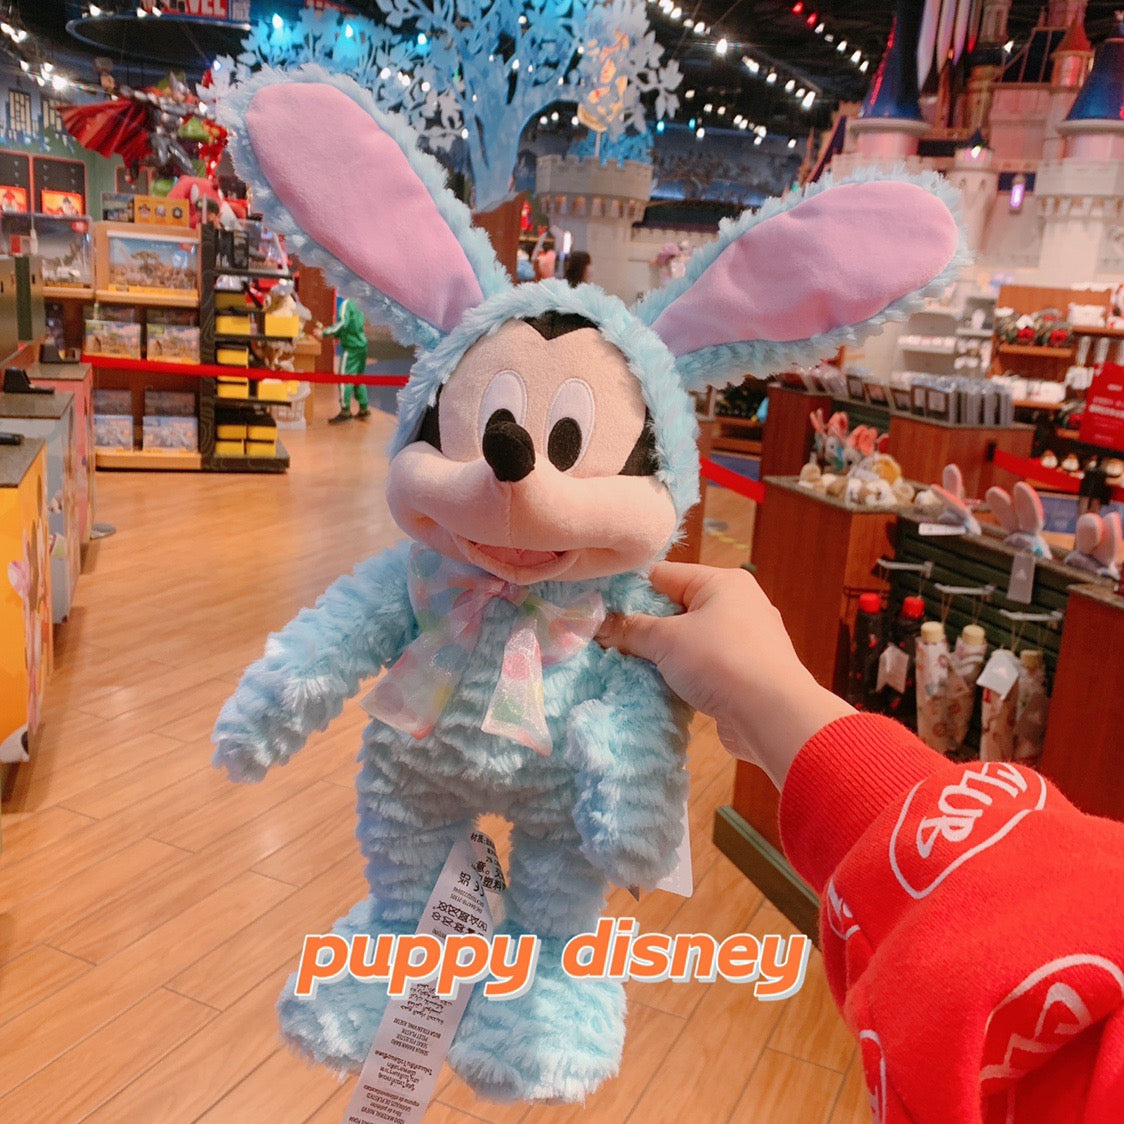 Shanghai Disney Easter holiday rabbit Mickey Mouse plush toy